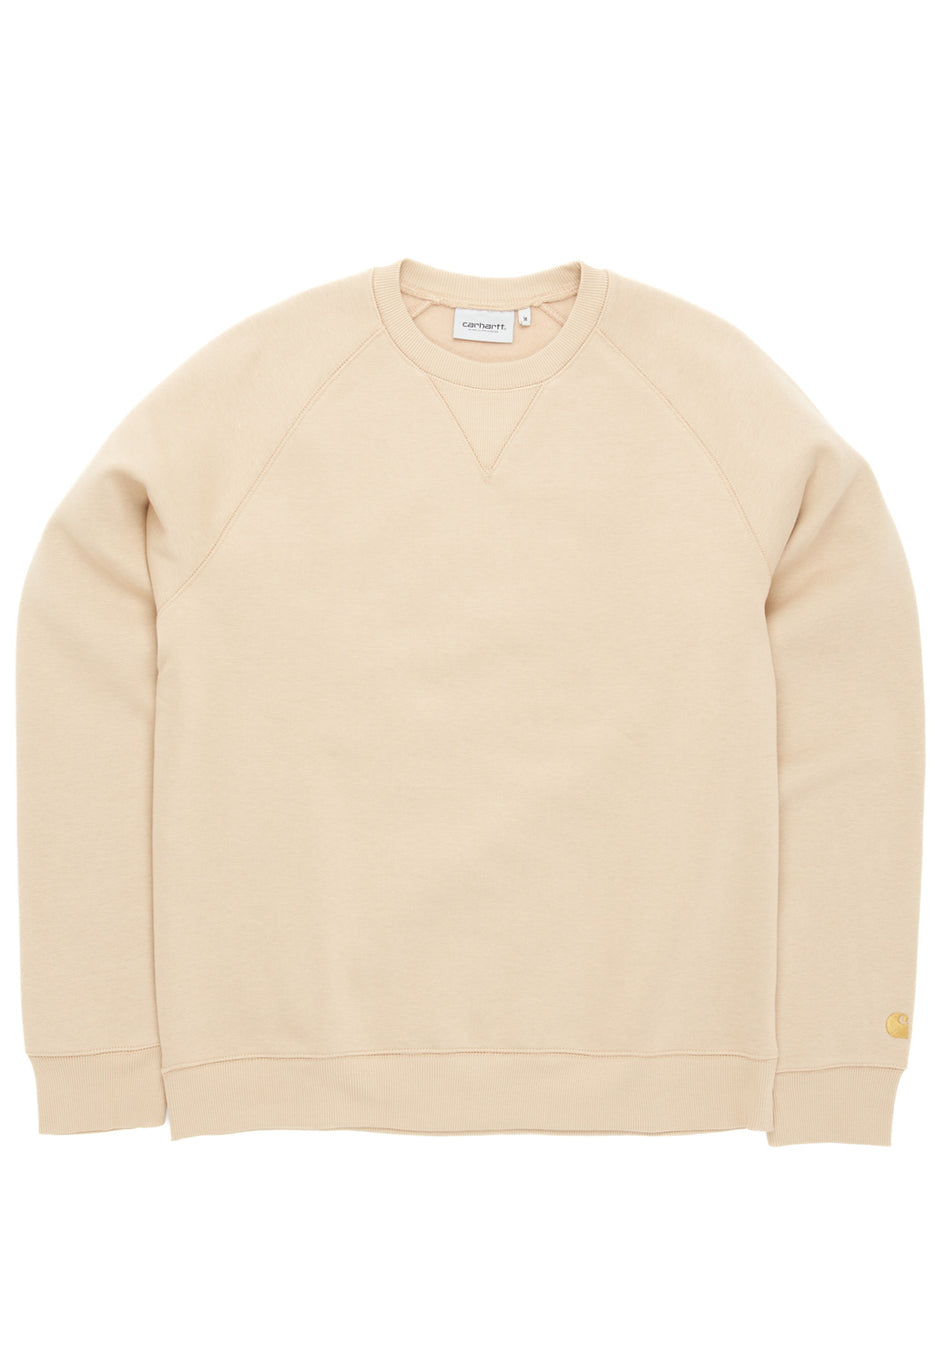 Carhartt WIP Men's Chase Sweat - Sable / Gold